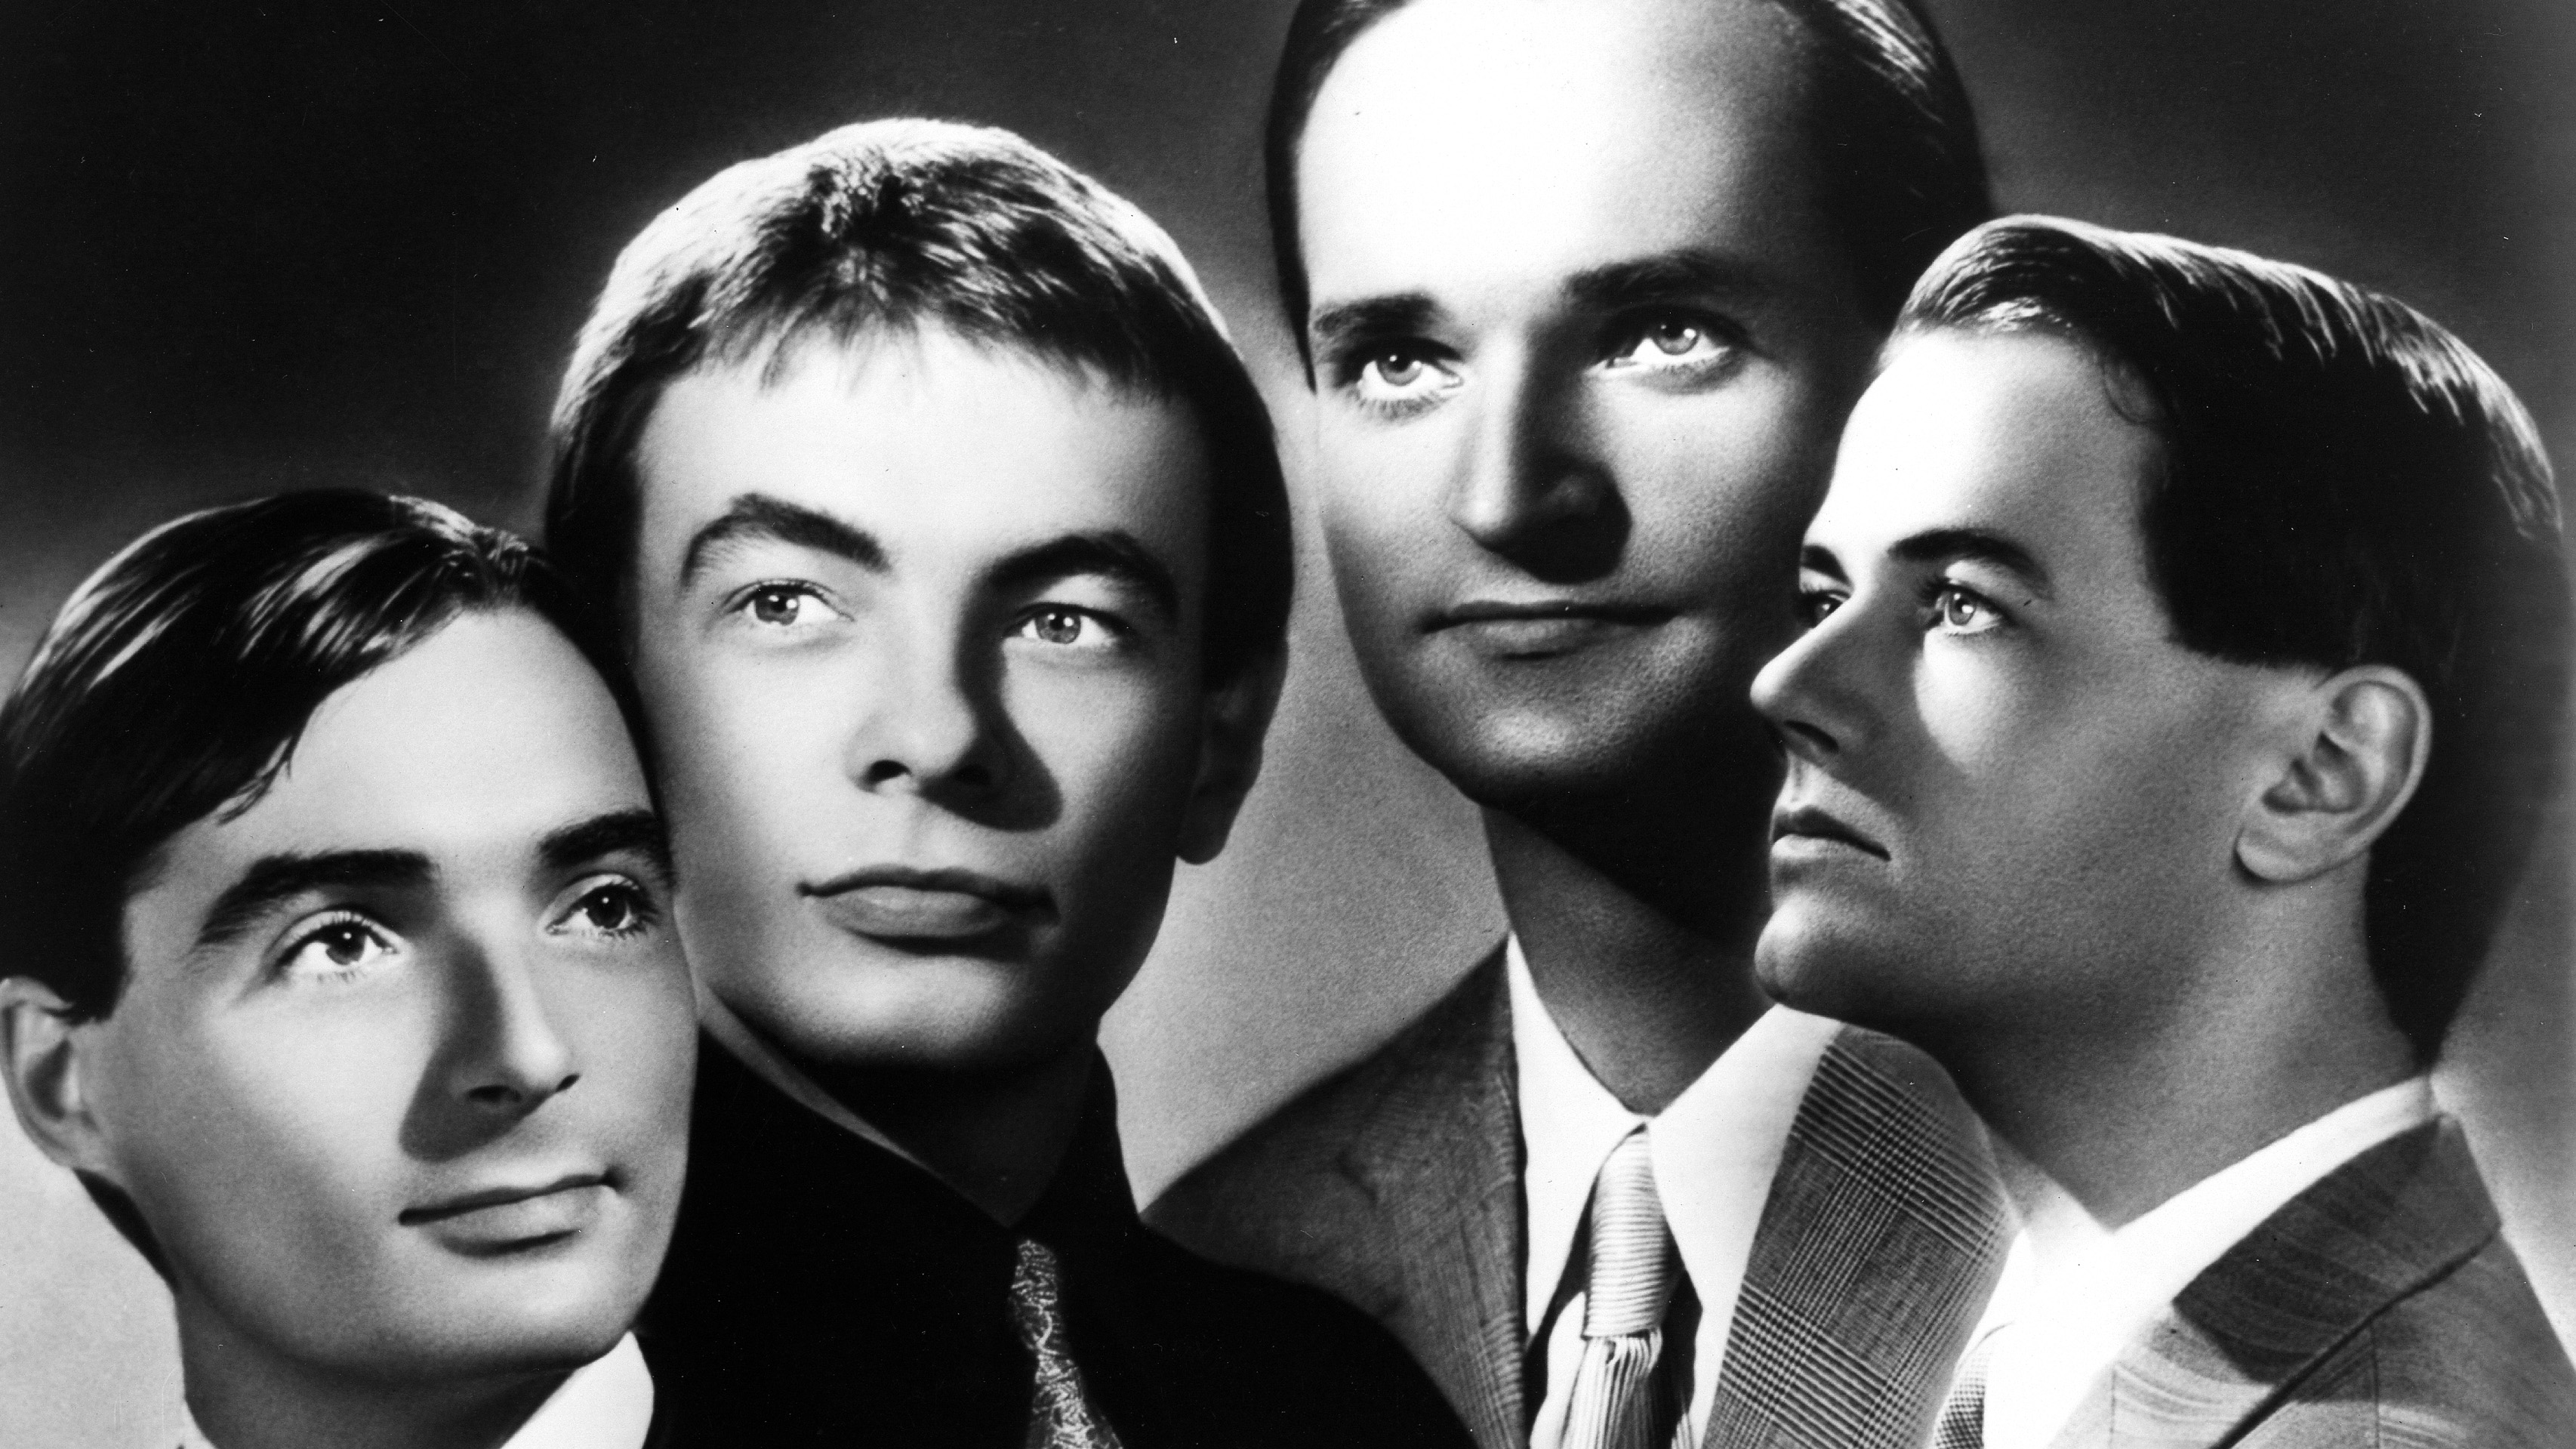 German electronic pioneers are performing eight concerts at London's Tate Modern. But is Kraftwerk's huge influence on modern music reflected in their album sales over the past 40 years?